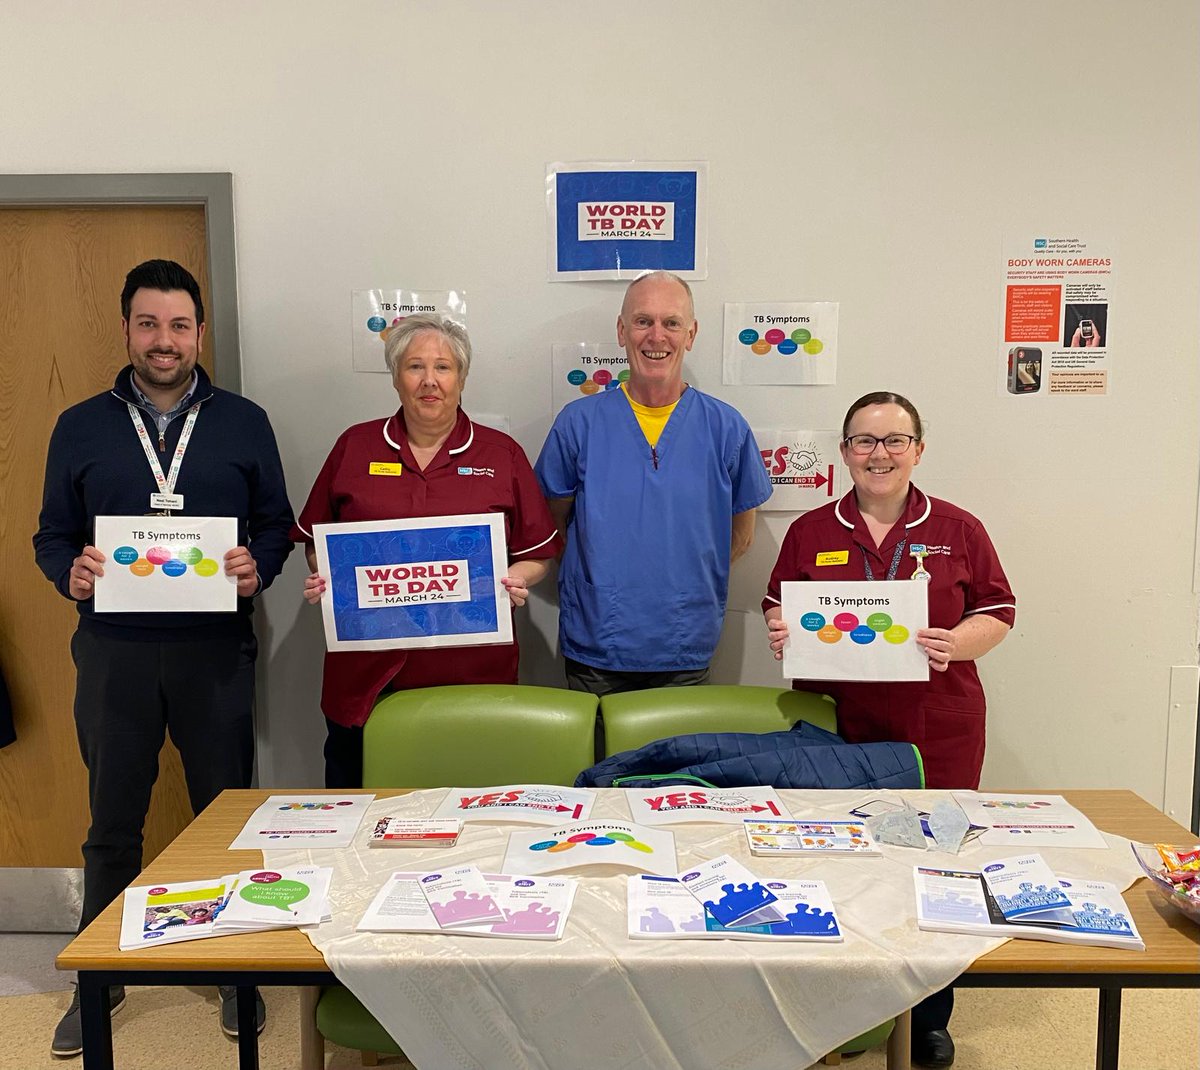 Ahead of World TB day this Sunday 24th March, TB Nurse Specialists, Respiratory Physician Dr Convery and Neal Tohani, Head of Service were in Craigavon Area Hospital today to provide more information about all aspects of Tuberculosis and the TB services available in the Trust.